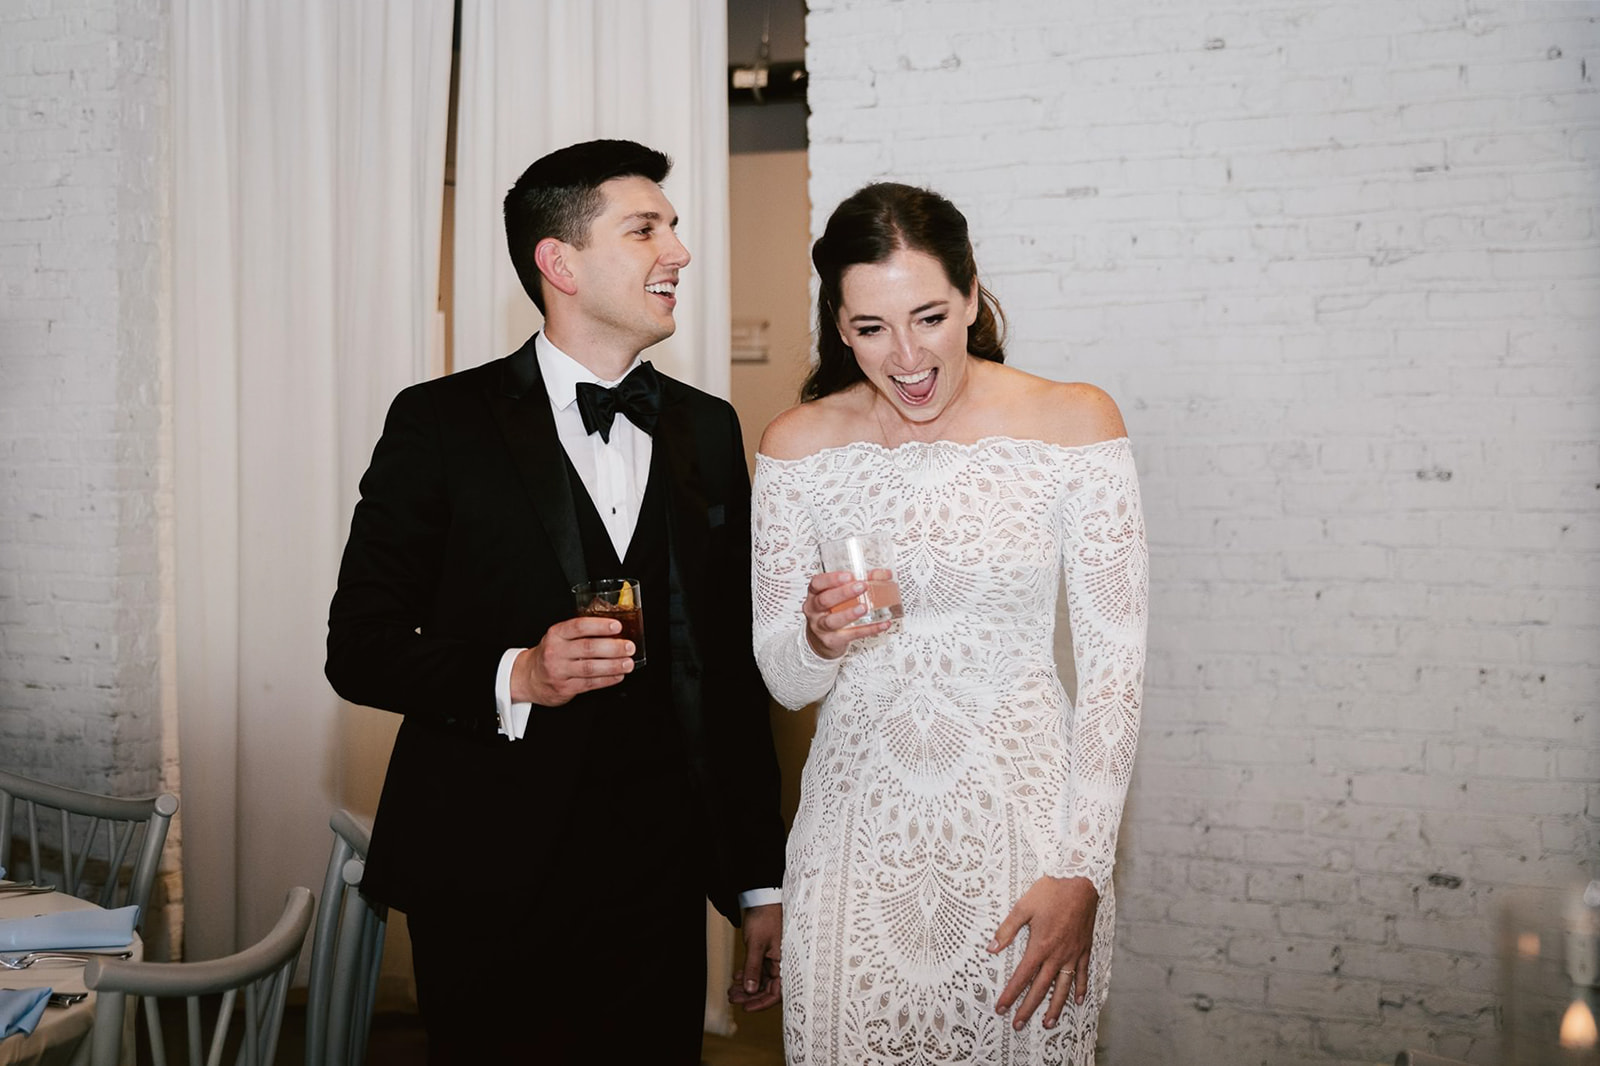 The bride and groom share a delighted reaction upon seeing their reception space at Walden Chicago.